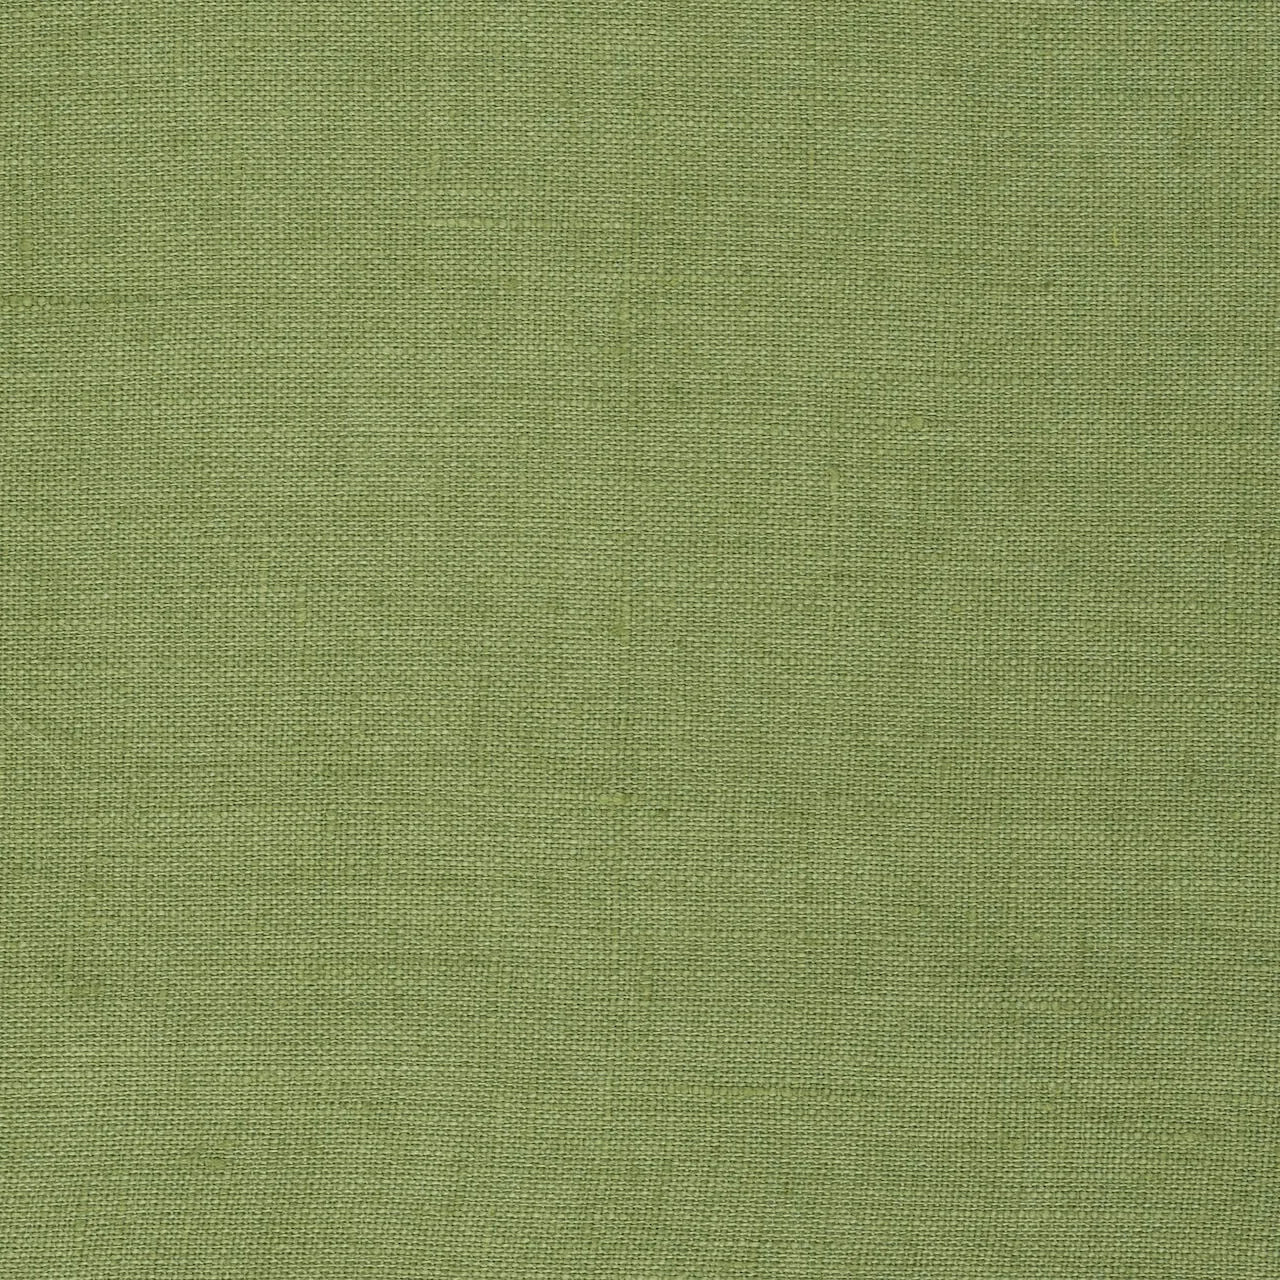 Washed Pure Fern Green Linen Fabric 205 g/m²